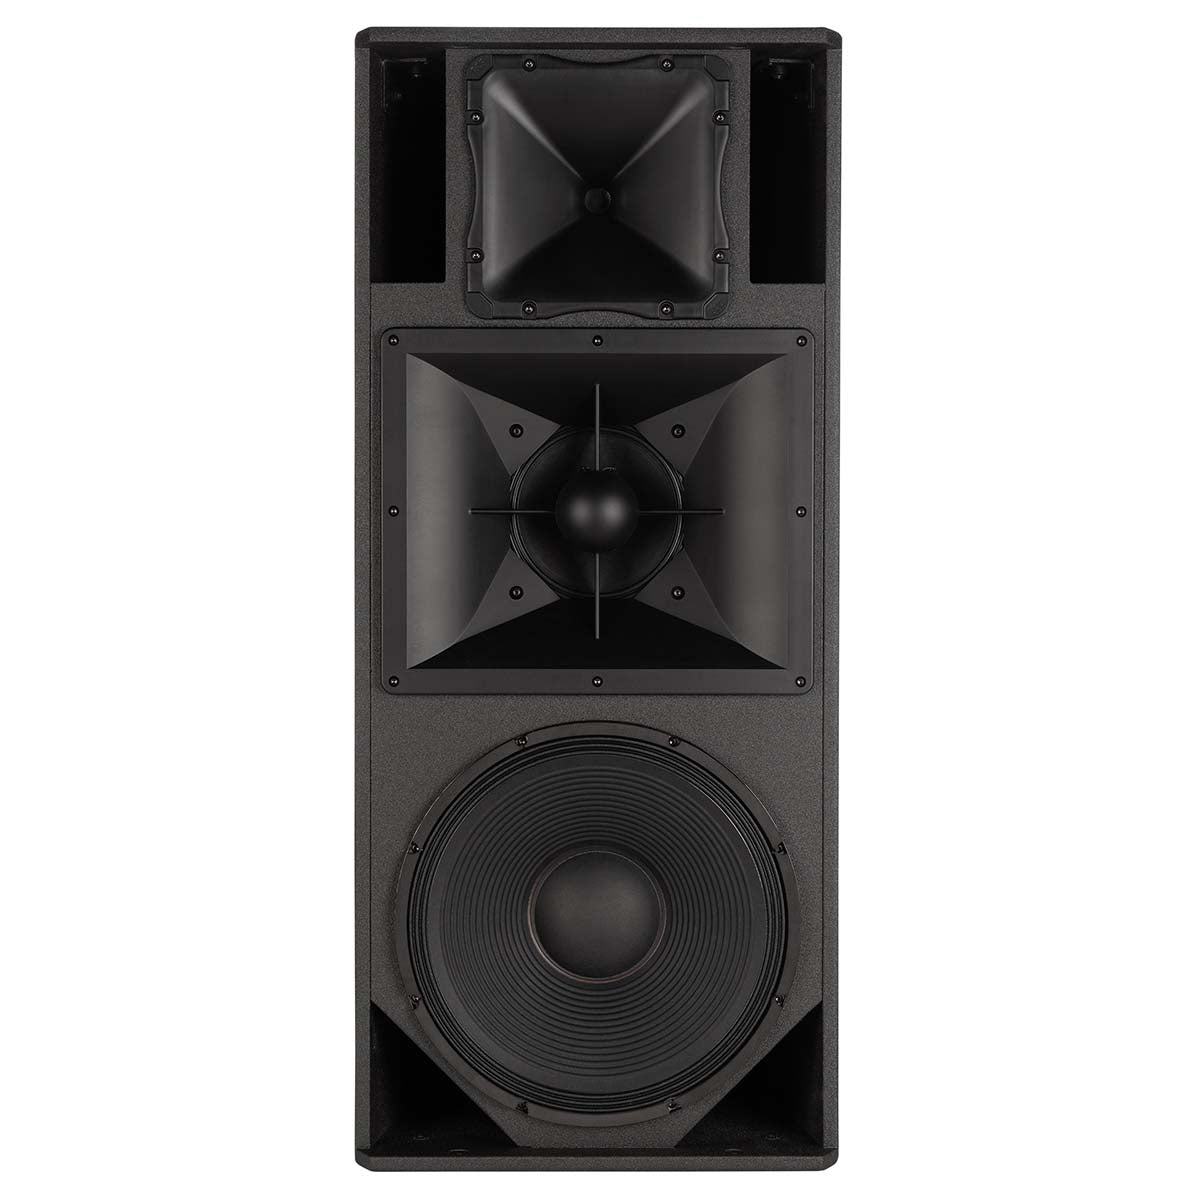 RCF NX 985-A + SUB 8008-AS PA Speakers